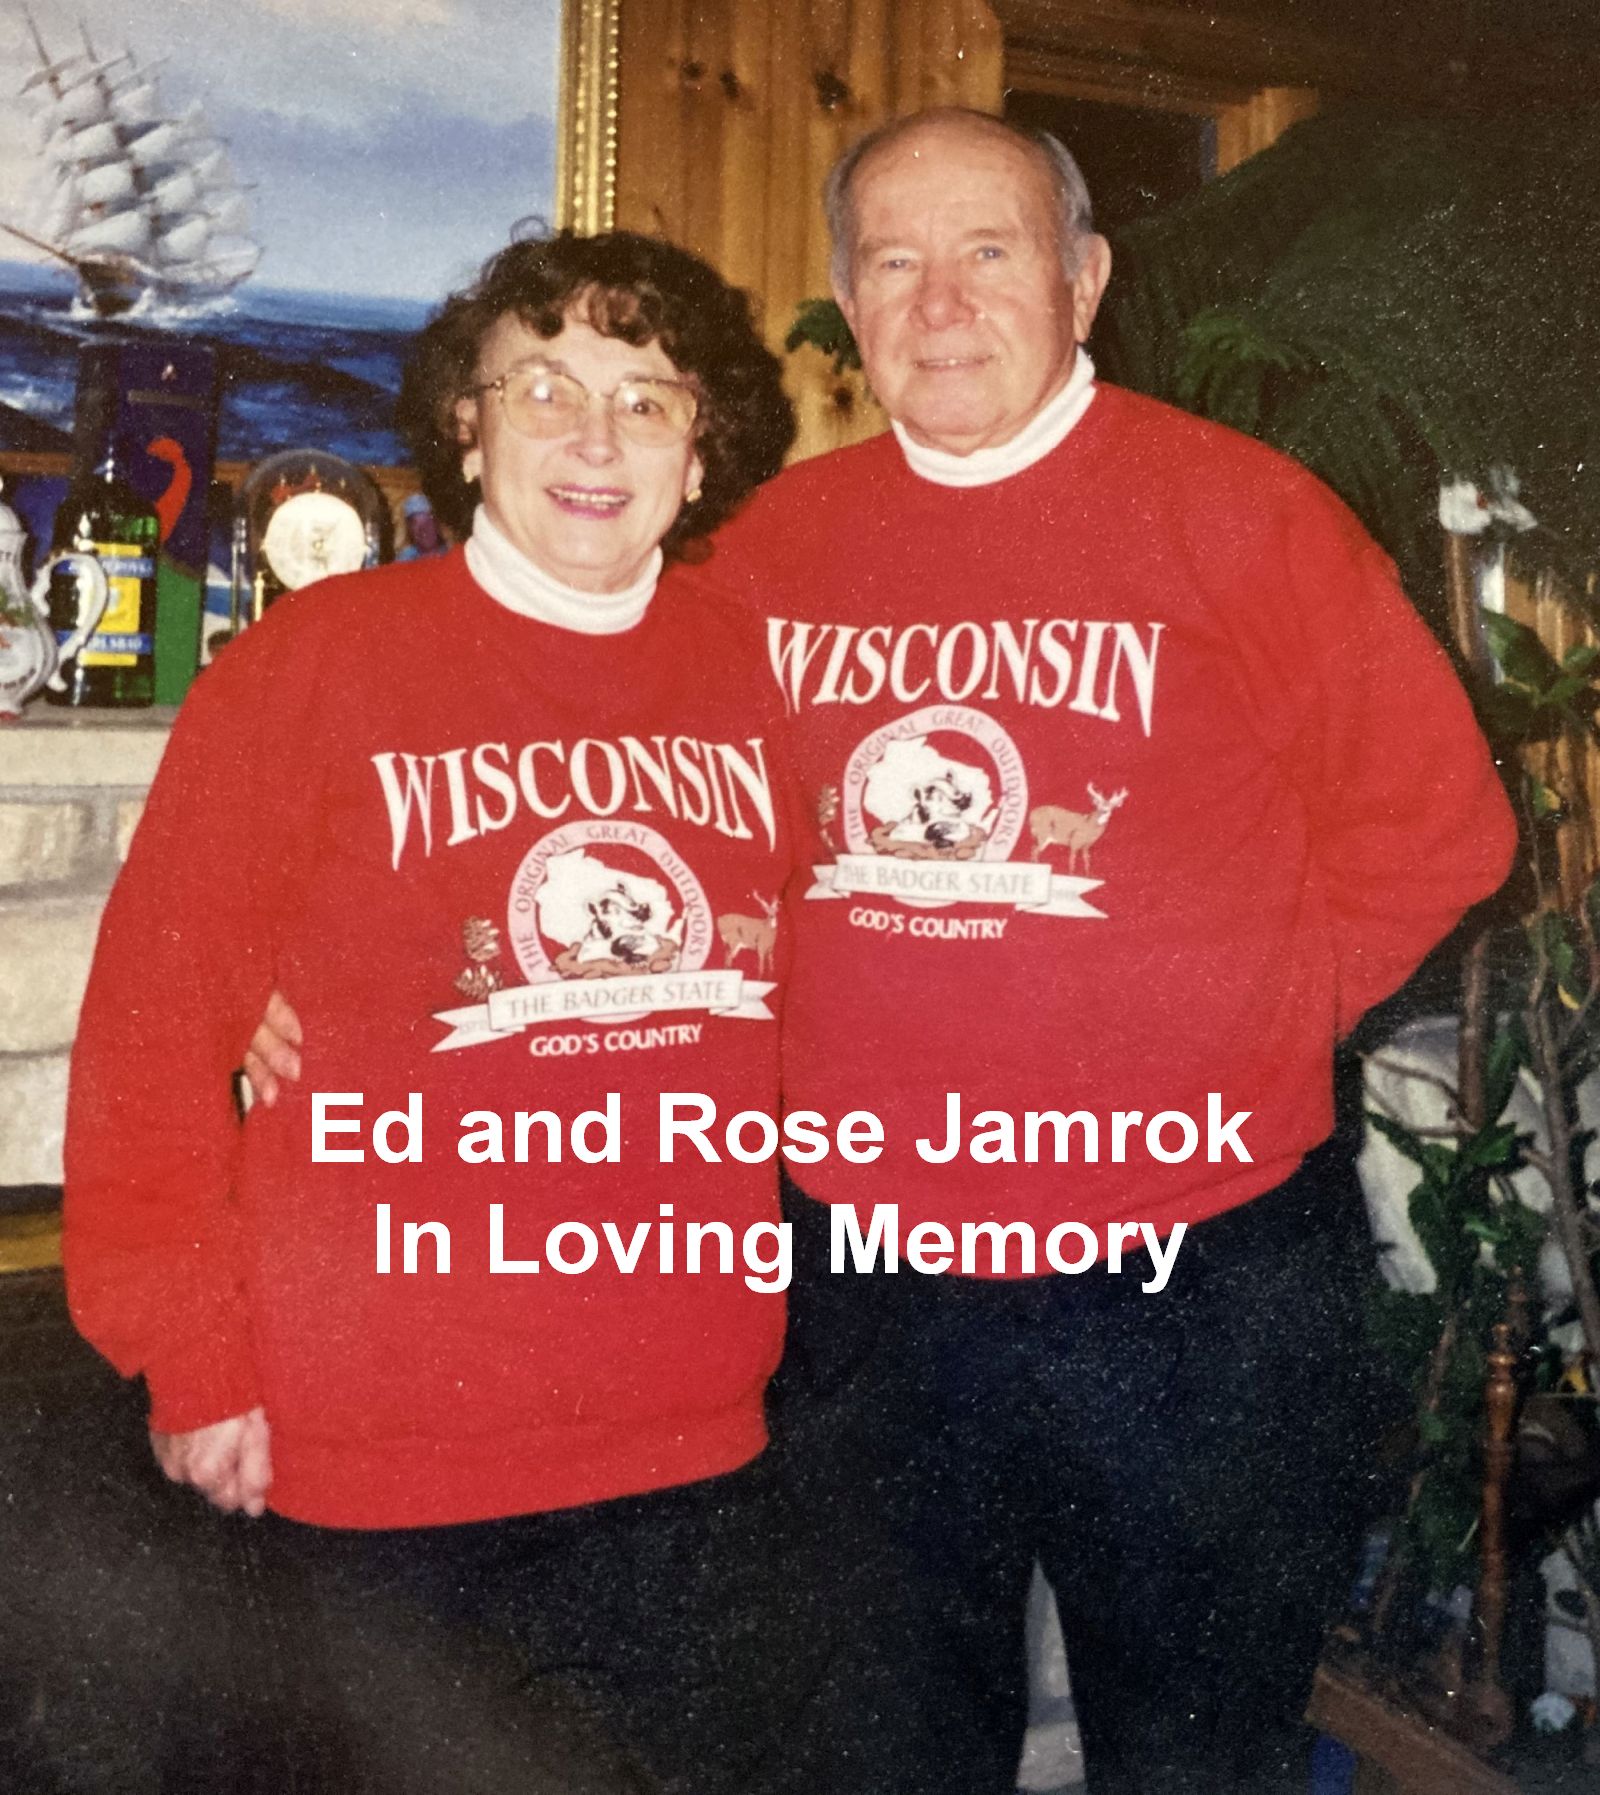 In Loving Memory of my great MOM and DAD who were wonderful people and who loved the out-of-doors and who loved fishing in particular.- Roseanne Jamrok